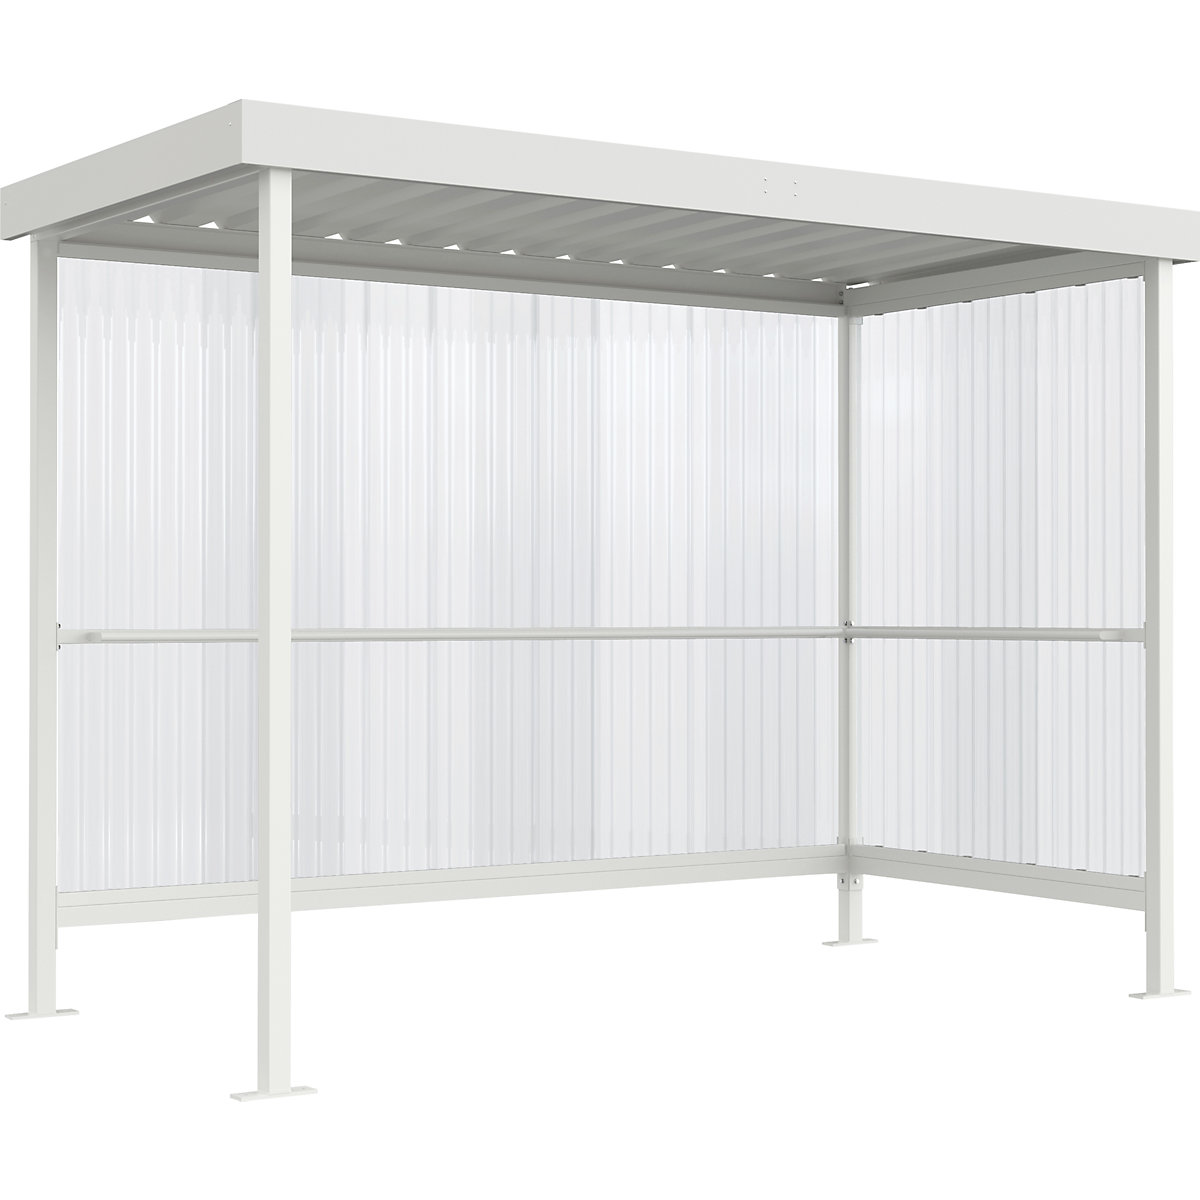 Shelter, open on one side, WxD 2960 x 1580 mm, grey white-2